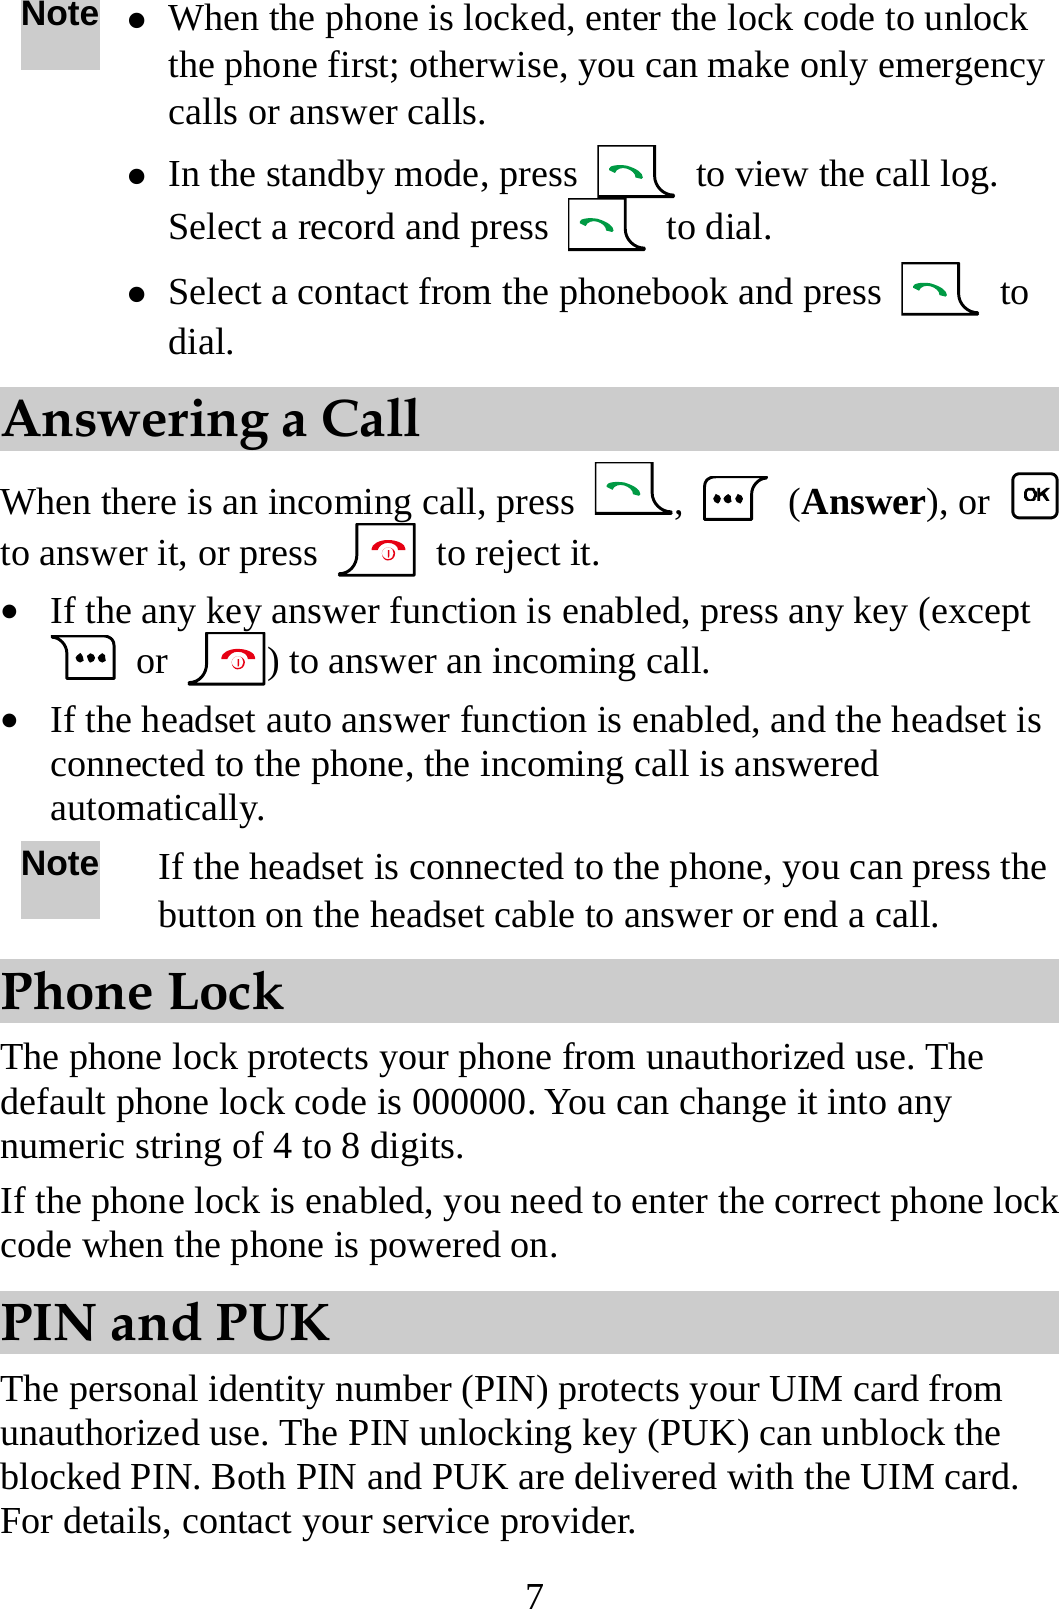 7 Note z When the phone is locked, enter the lock code to unlock the phone first; otherwise, you can make only emergency calls or answer calls. z In the standby mode, press    to view the call log. Select a record and press   to dial. z Select a contact from the phonebook and press   to dial. Answering a Call When there is an incoming call, press  ,   (Answer), or   to answer it, or press    to reject it. z If the any key answer function is enabled, press any key (except  or  ) to answer an incoming call. z If the headset auto answer function is enabled, and the headset is connected to the phone, the incoming call is answered automatically. Note If the headset is connected to the phone, you can press the button on the headset cable to answer or end a call. Phone Lock The phone lock protects your phone from unauthorized use. The default phone lock code is 000000. You can change it into any numeric string of 4 to 8 digits. If the phone lock is enabled, you need to enter the correct phone lock code when the phone is powered on. PIN and PUK The personal identity number (PIN) protects your UIM card from unauthorized use. The PIN unlocking key (PUK) can unblock the blocked PIN. Both PIN and PUK are delivered with the UIM card. For details, contact your service provider. 